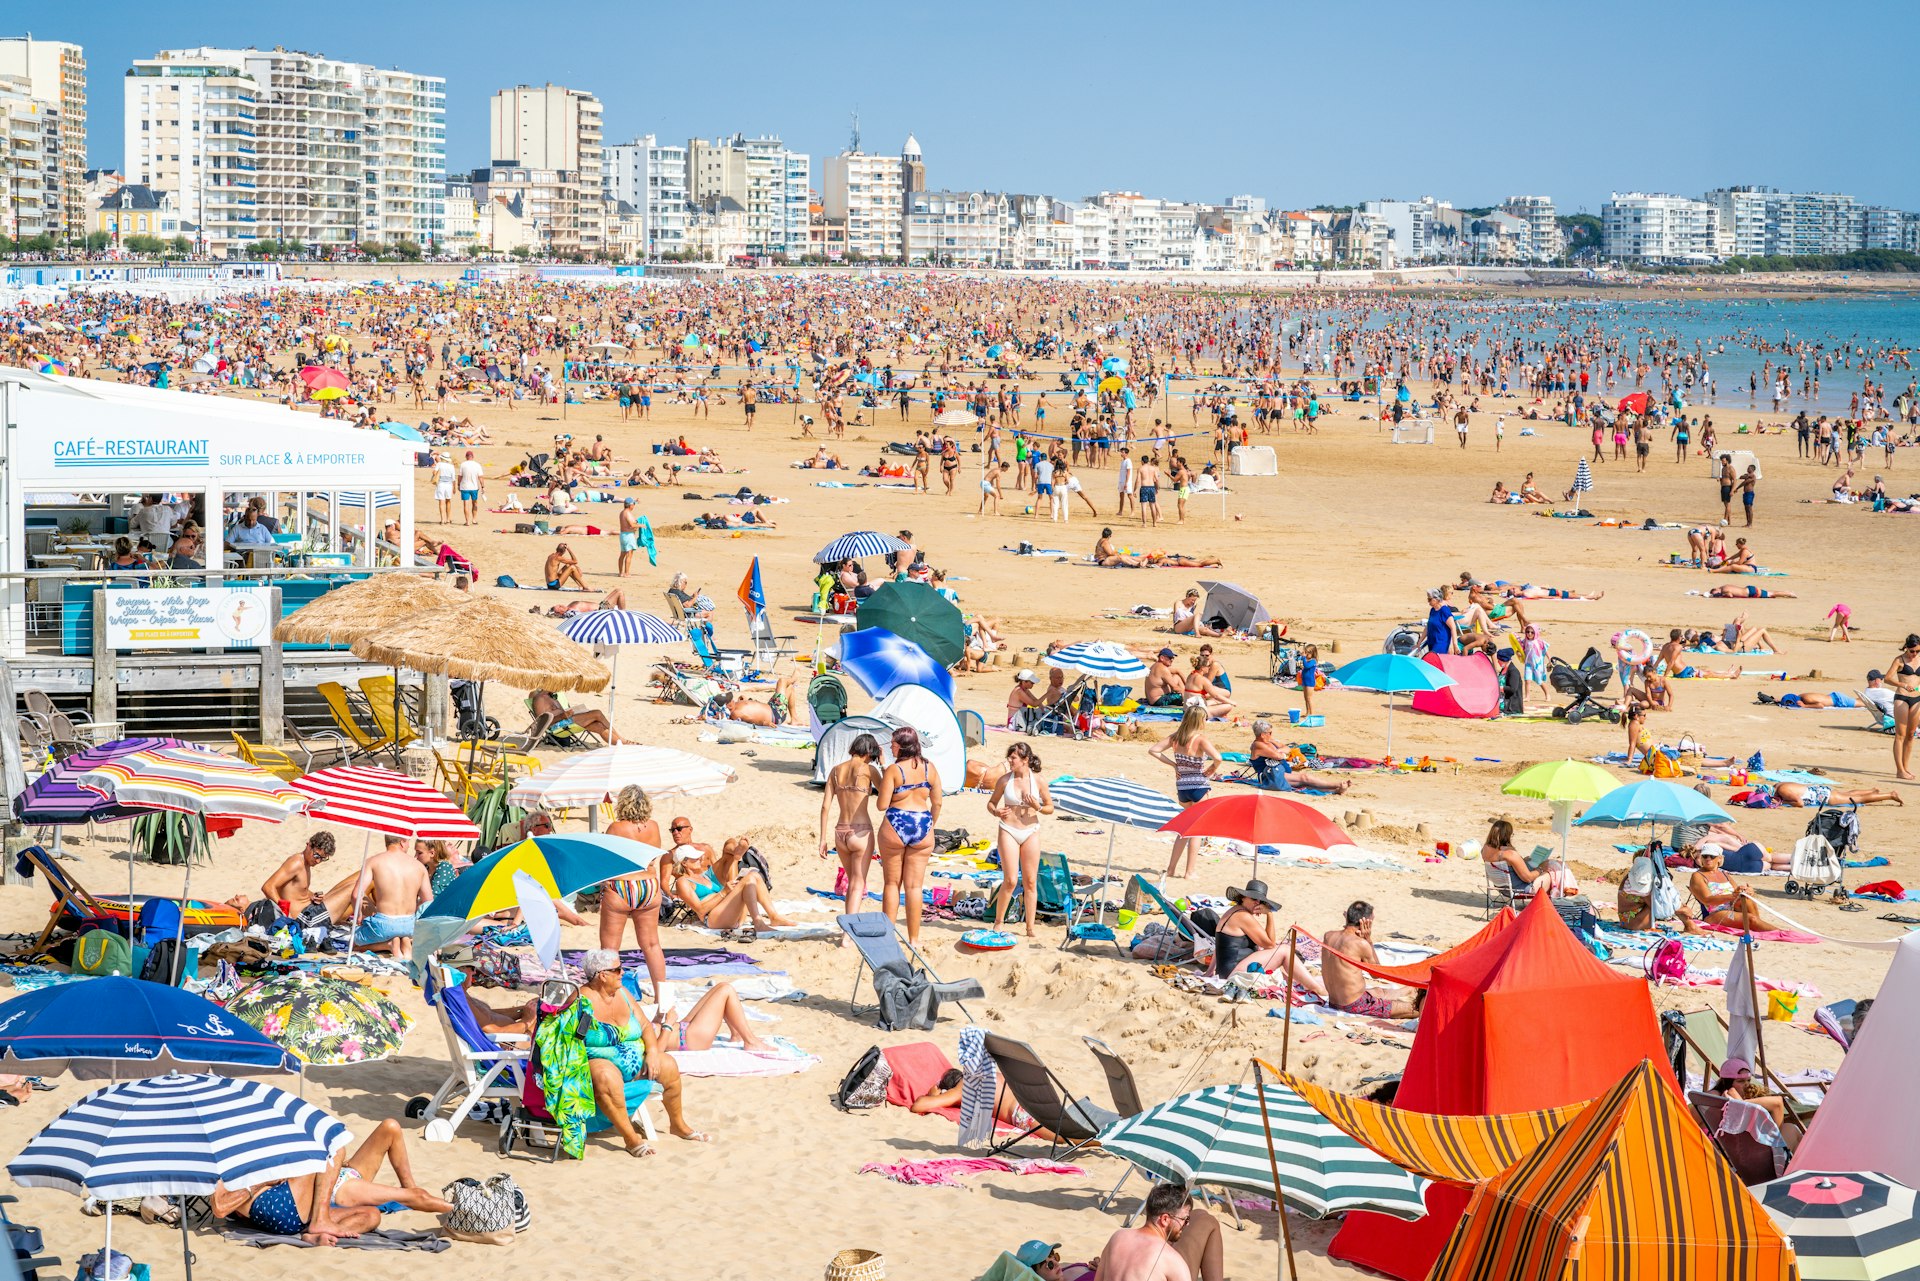 View of La Grande Plage beach of Les Sables d’Olonne crowded with people during summer 2021